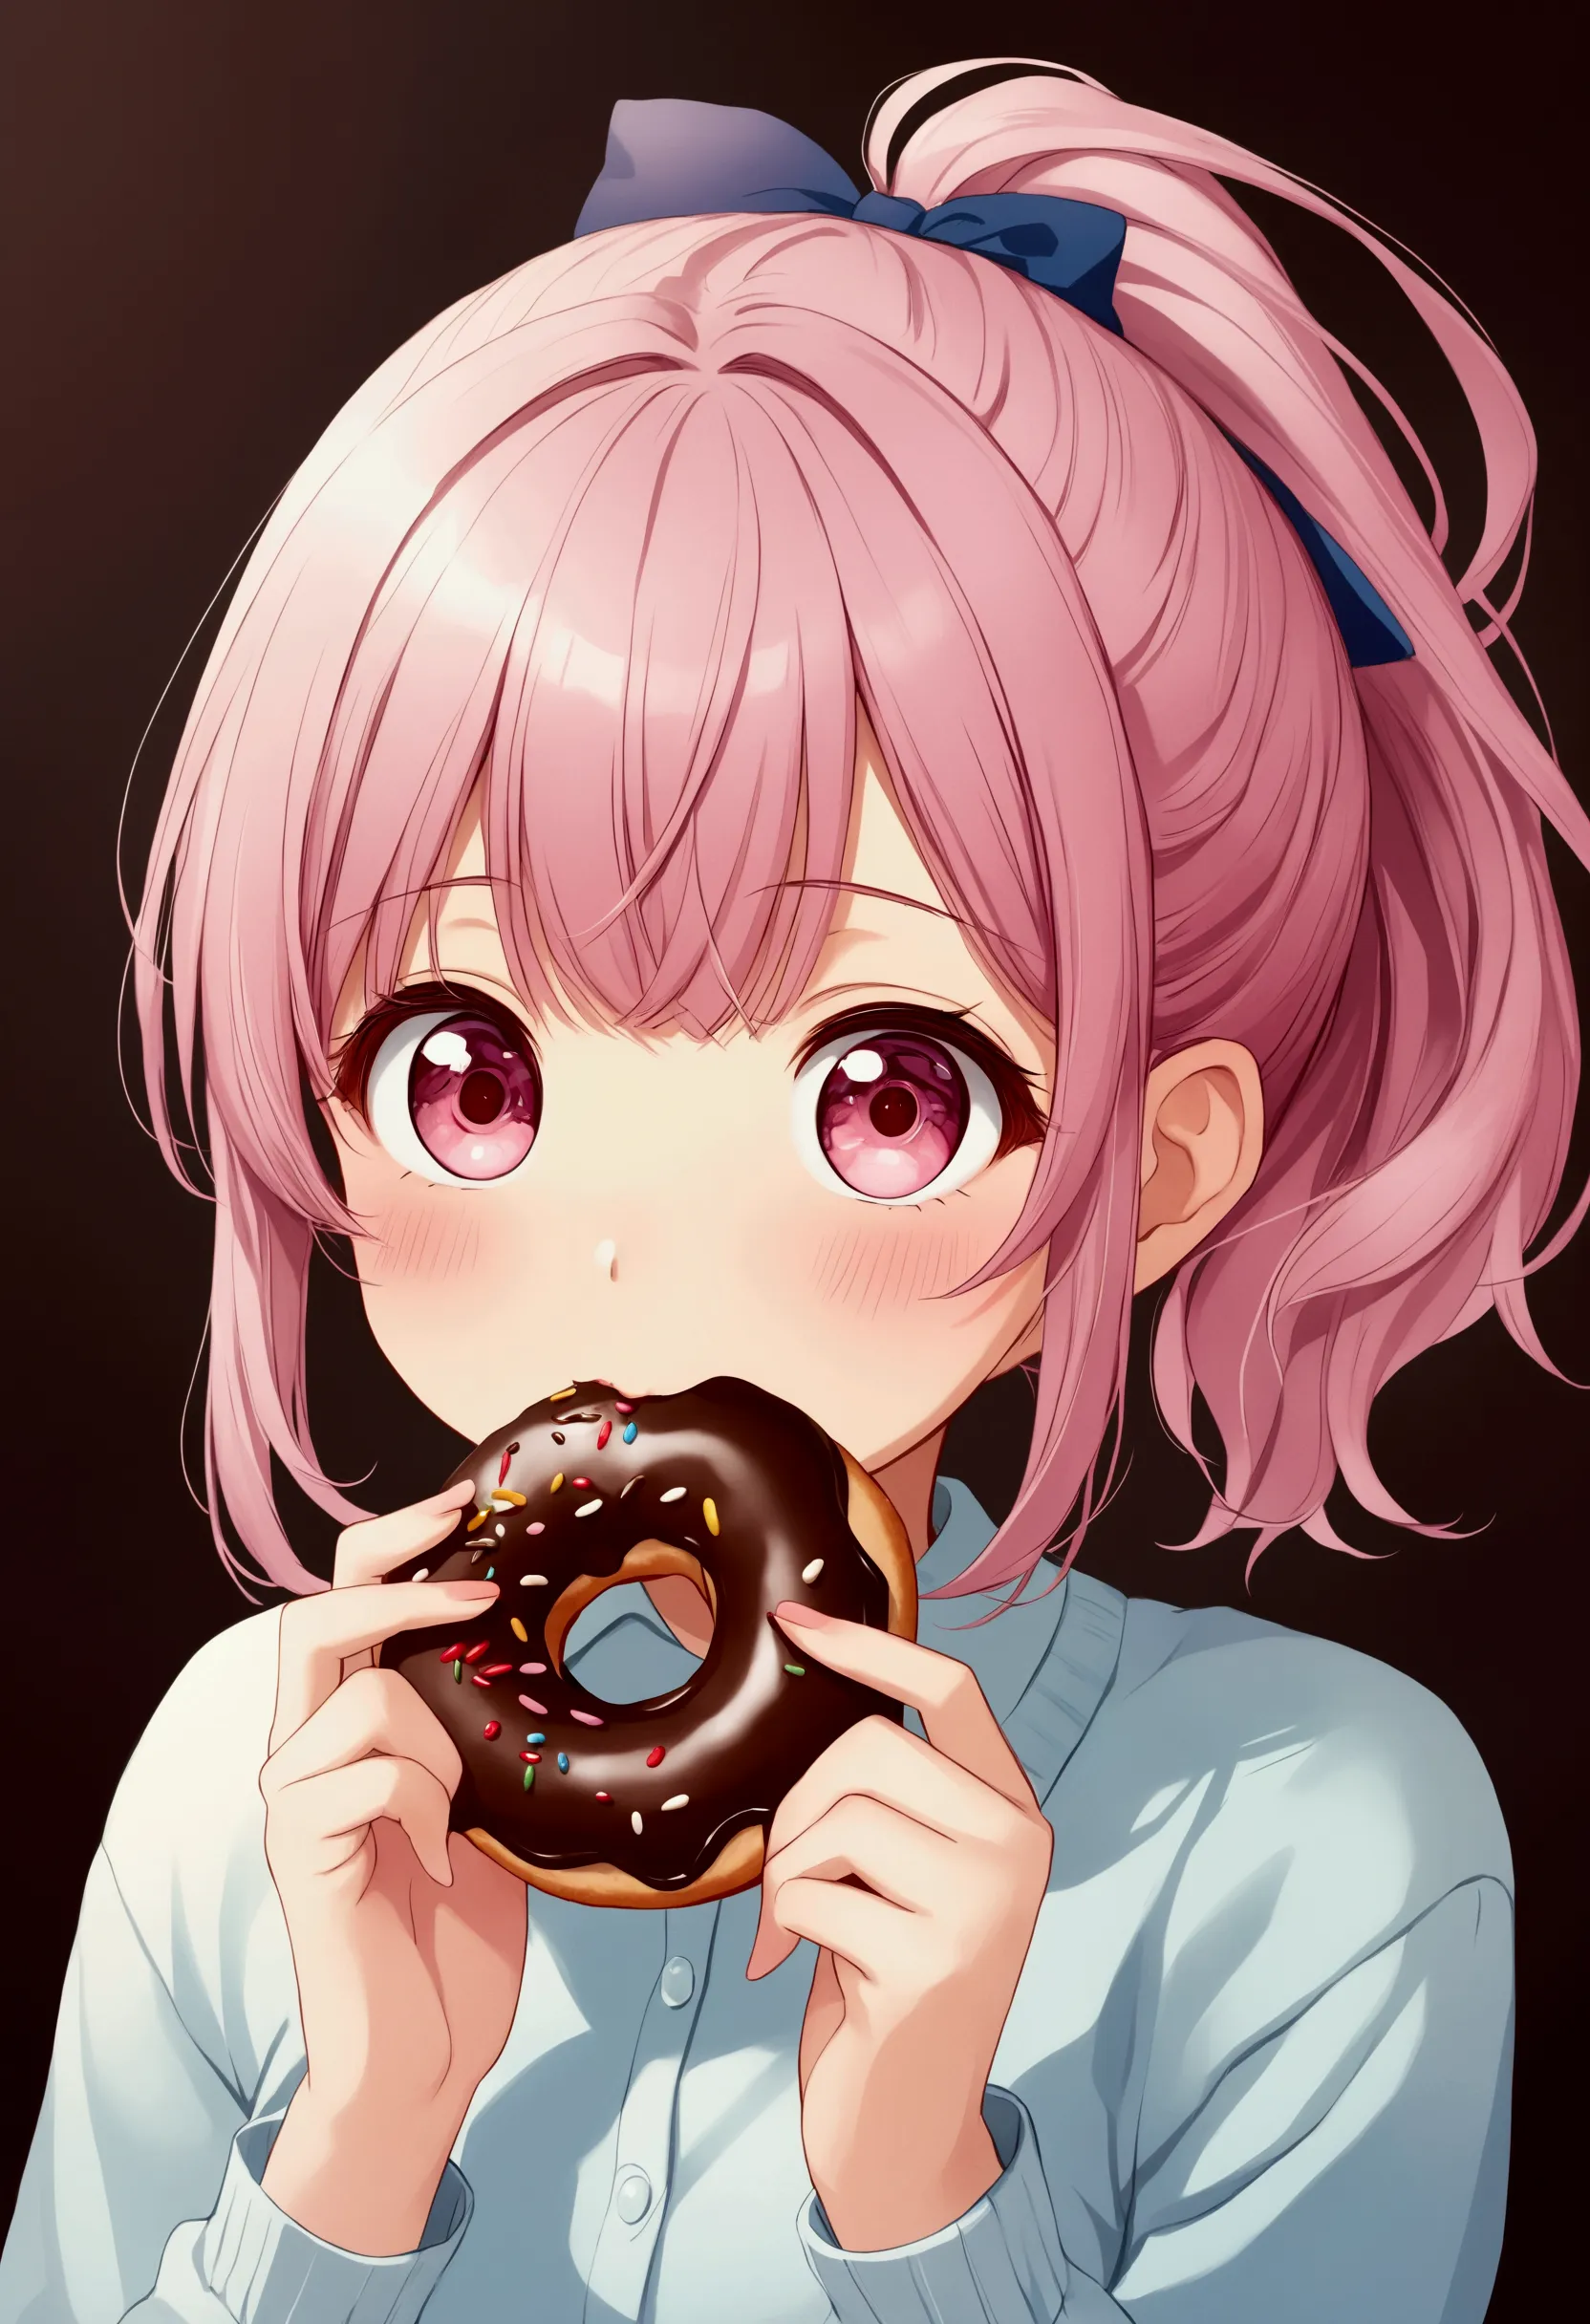 Anime girl eating chocolate donut，Pink ponytail, Animation works by Kentaro Miura, pixiv, realism, Eat donuts, Cute anime girl, ...